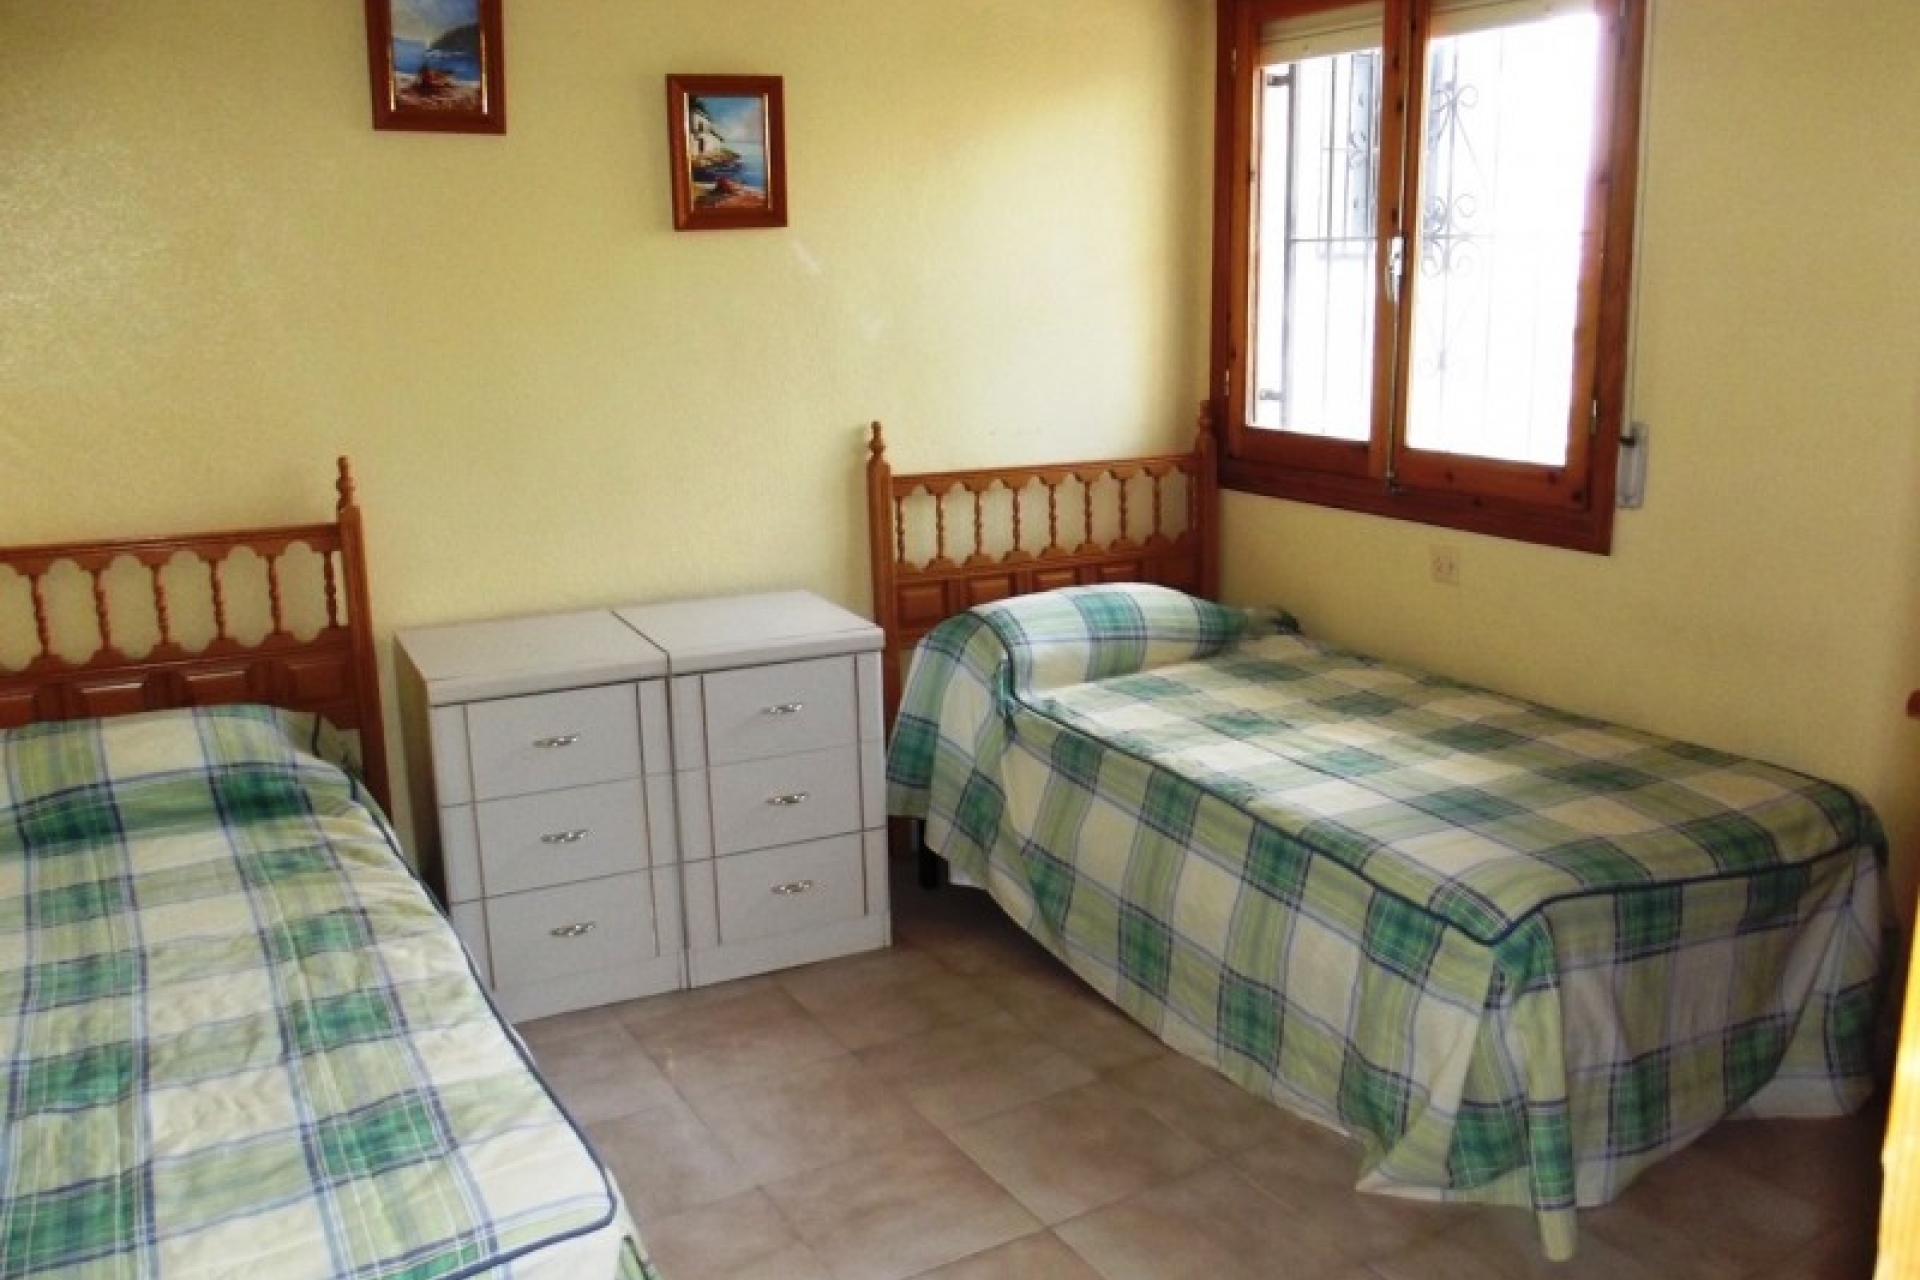 For sale bargain in San Luis, Costa Blanca, Spain. Cheap property for sale close to Torrevieja and La Siesta for sale.